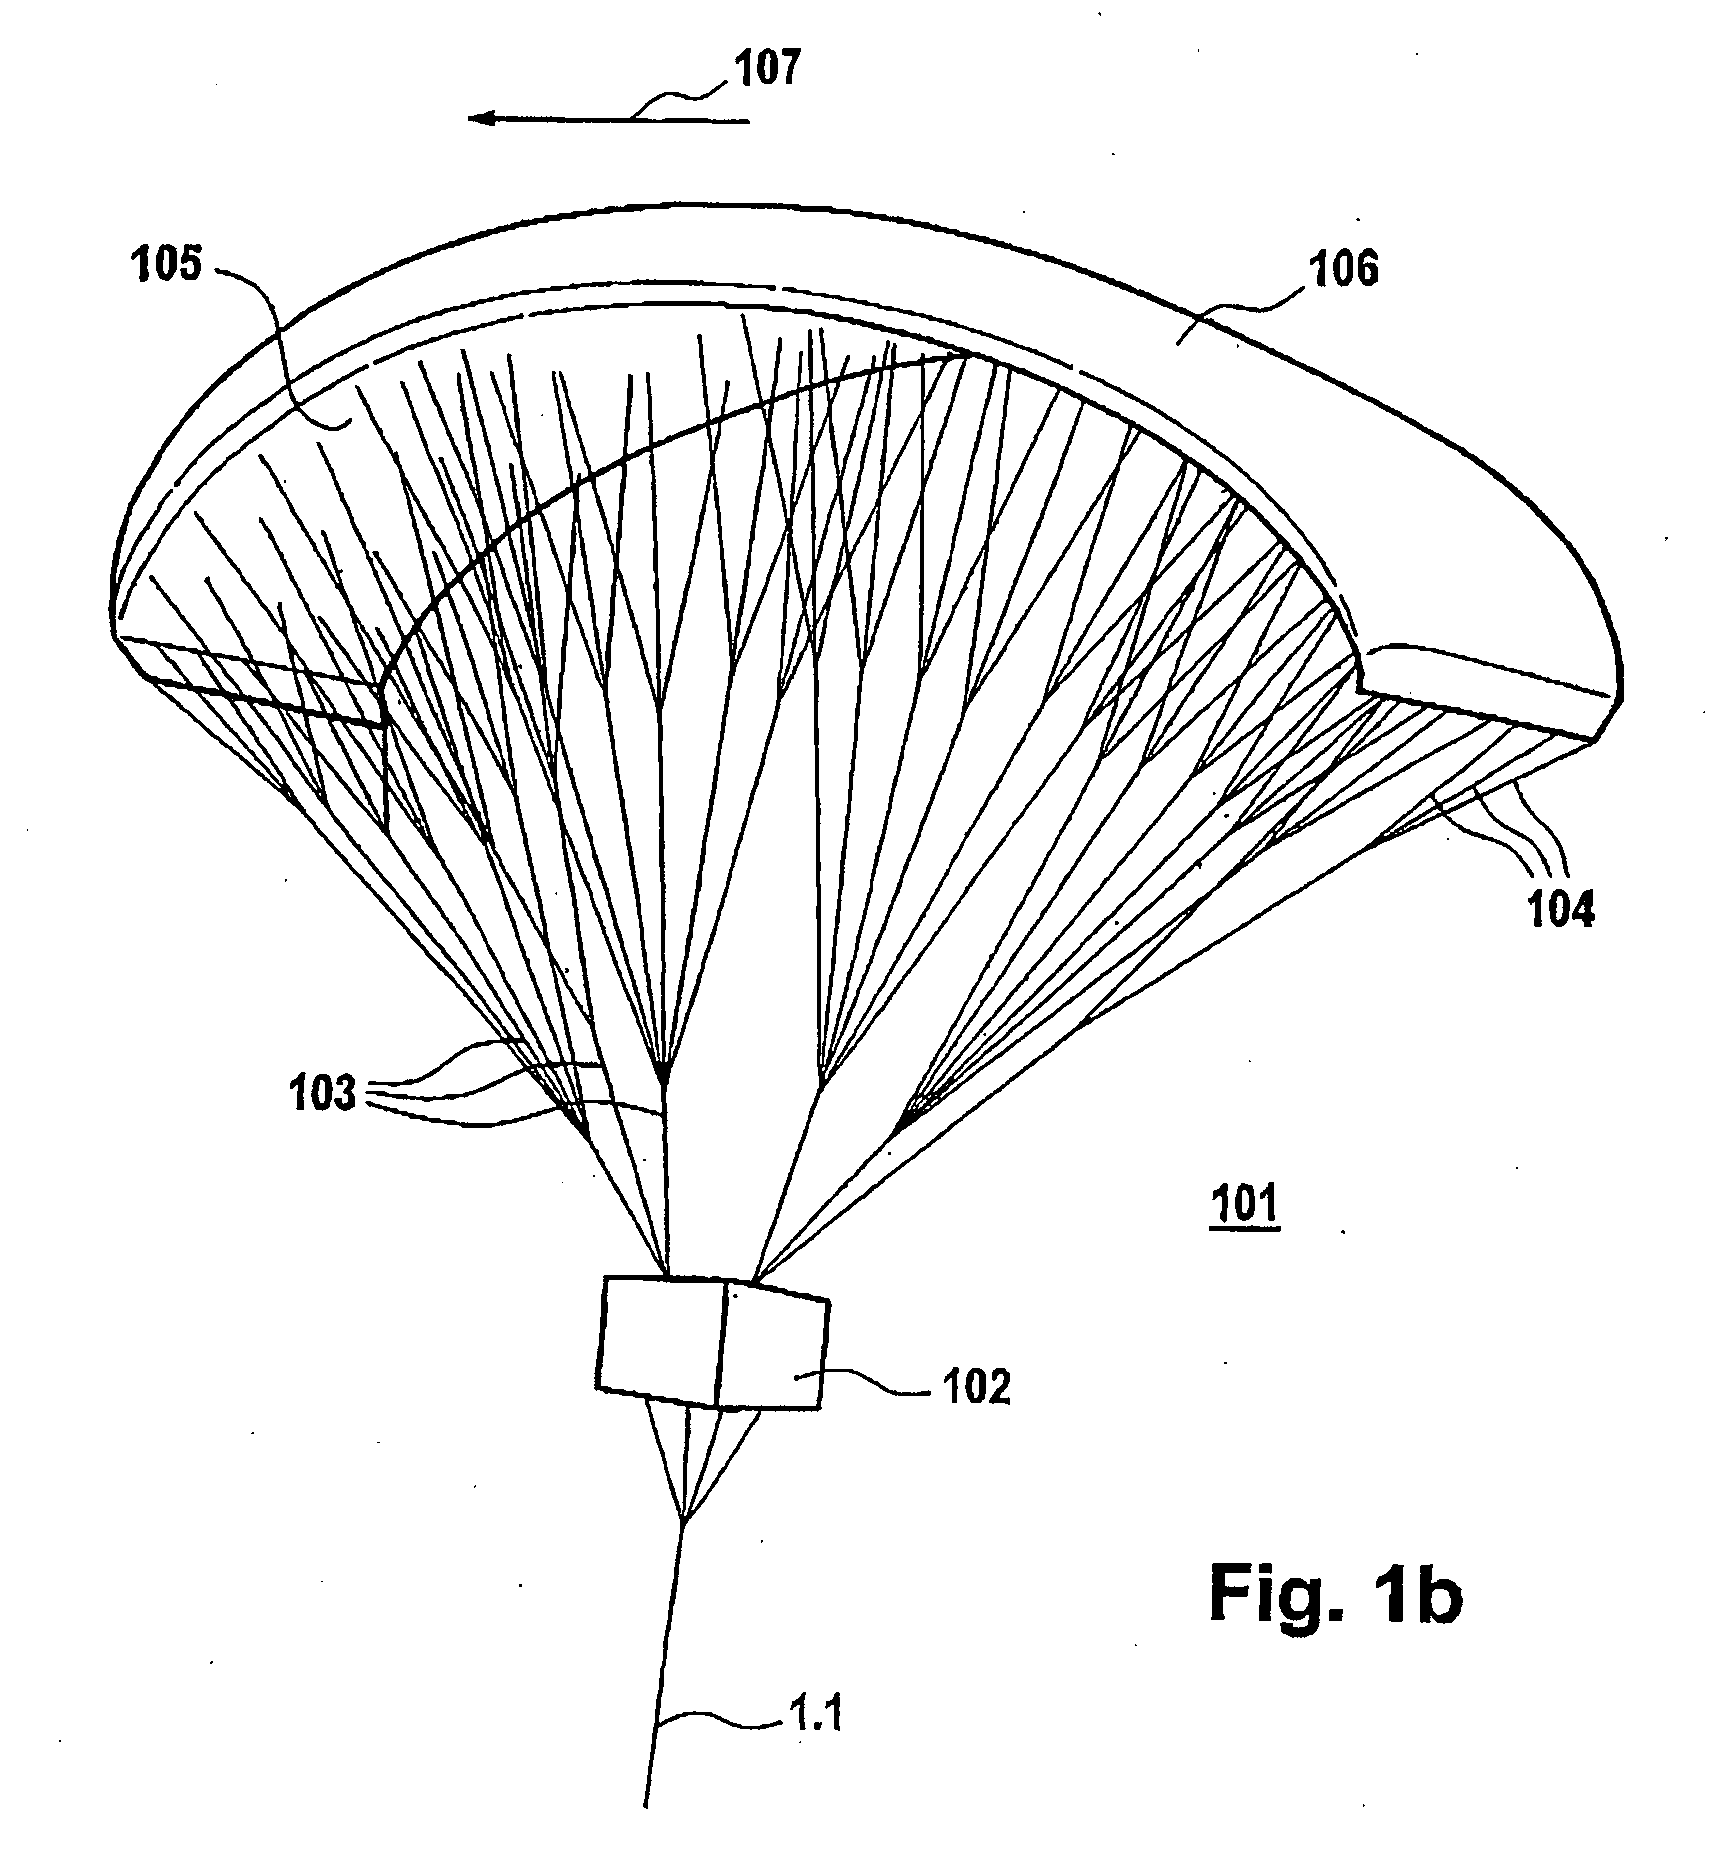 Positioning device for a free-flying kite-type wind-attacked element in a wind-powered watercraft